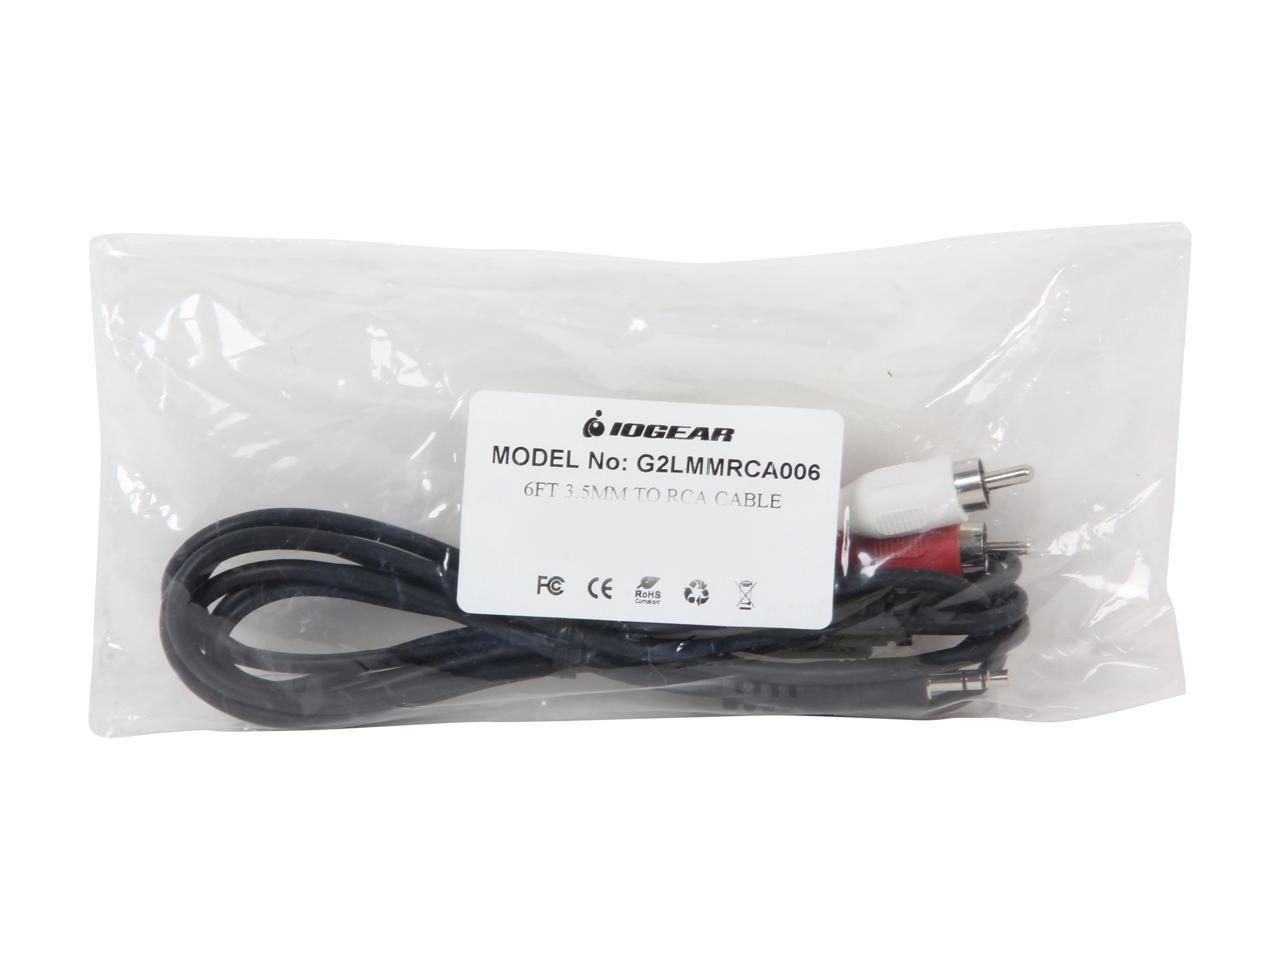 IOGEAR G2LMMRCA006 6 ft. 3.5mm to RCA Audio Cable